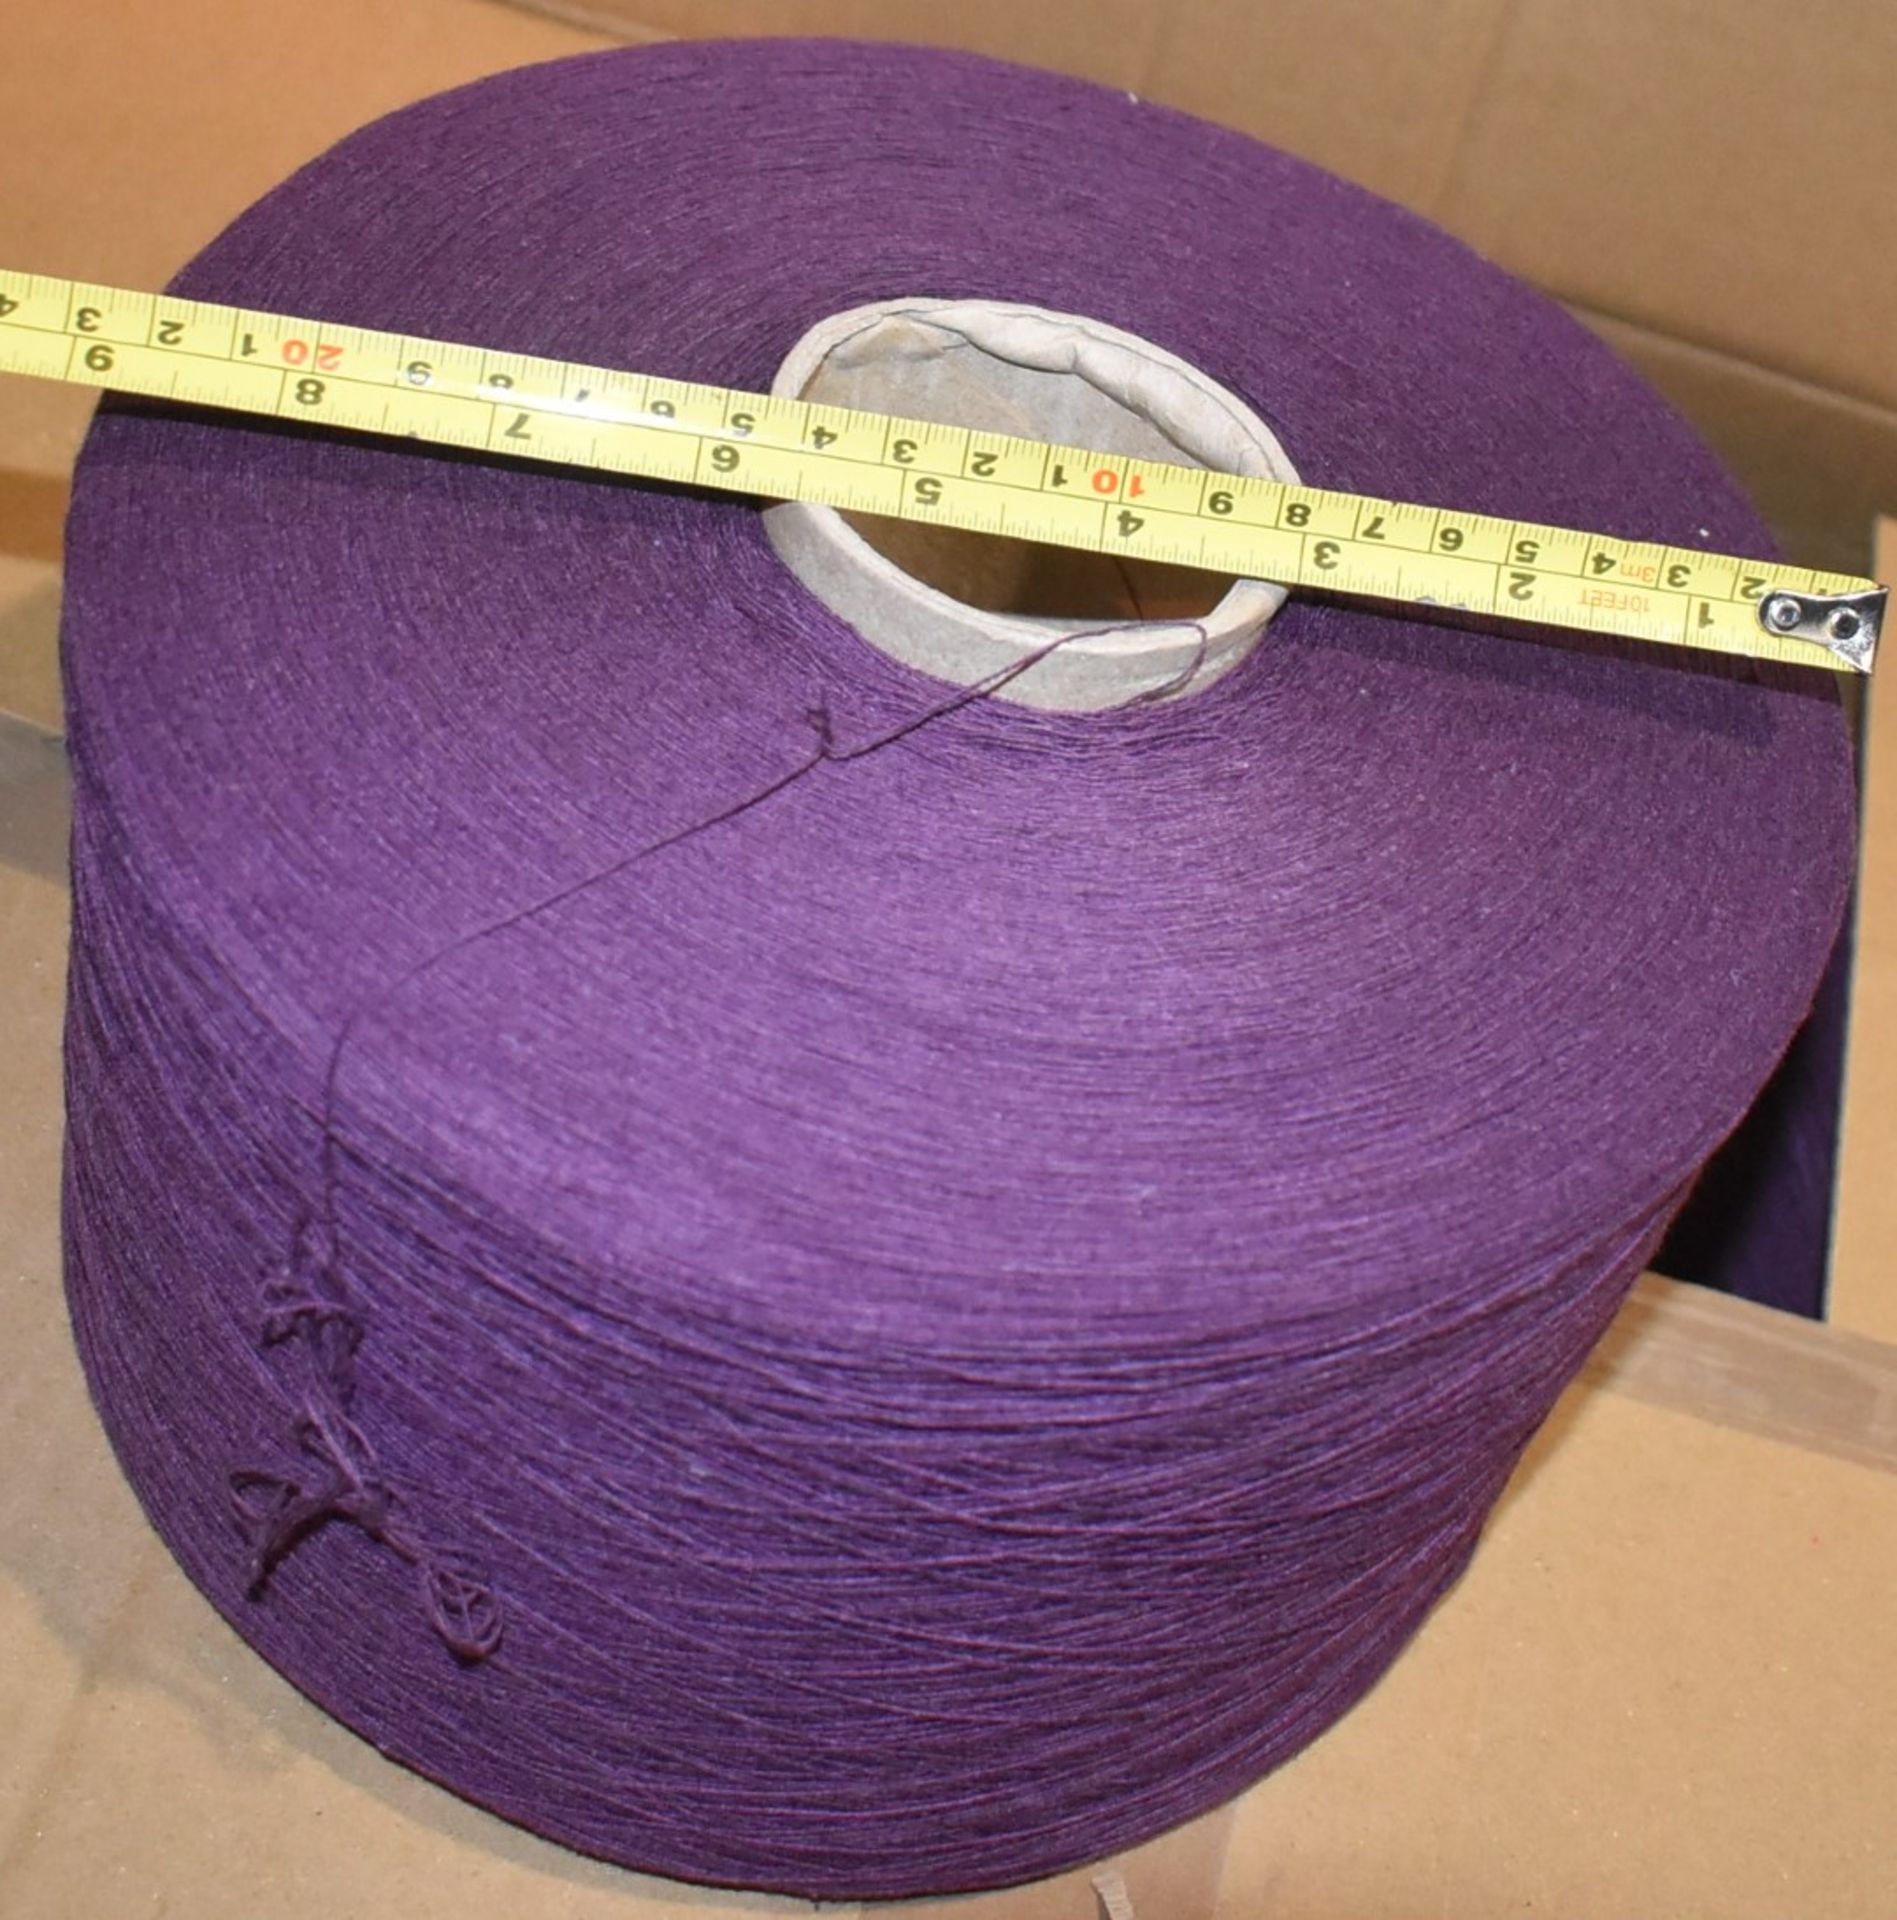 12 x Cones of 1/13 MicroCotton Knitting Yarn - Purple - Approx Weight: 2,300g - New Stock ABL Yarn - Image 7 of 9